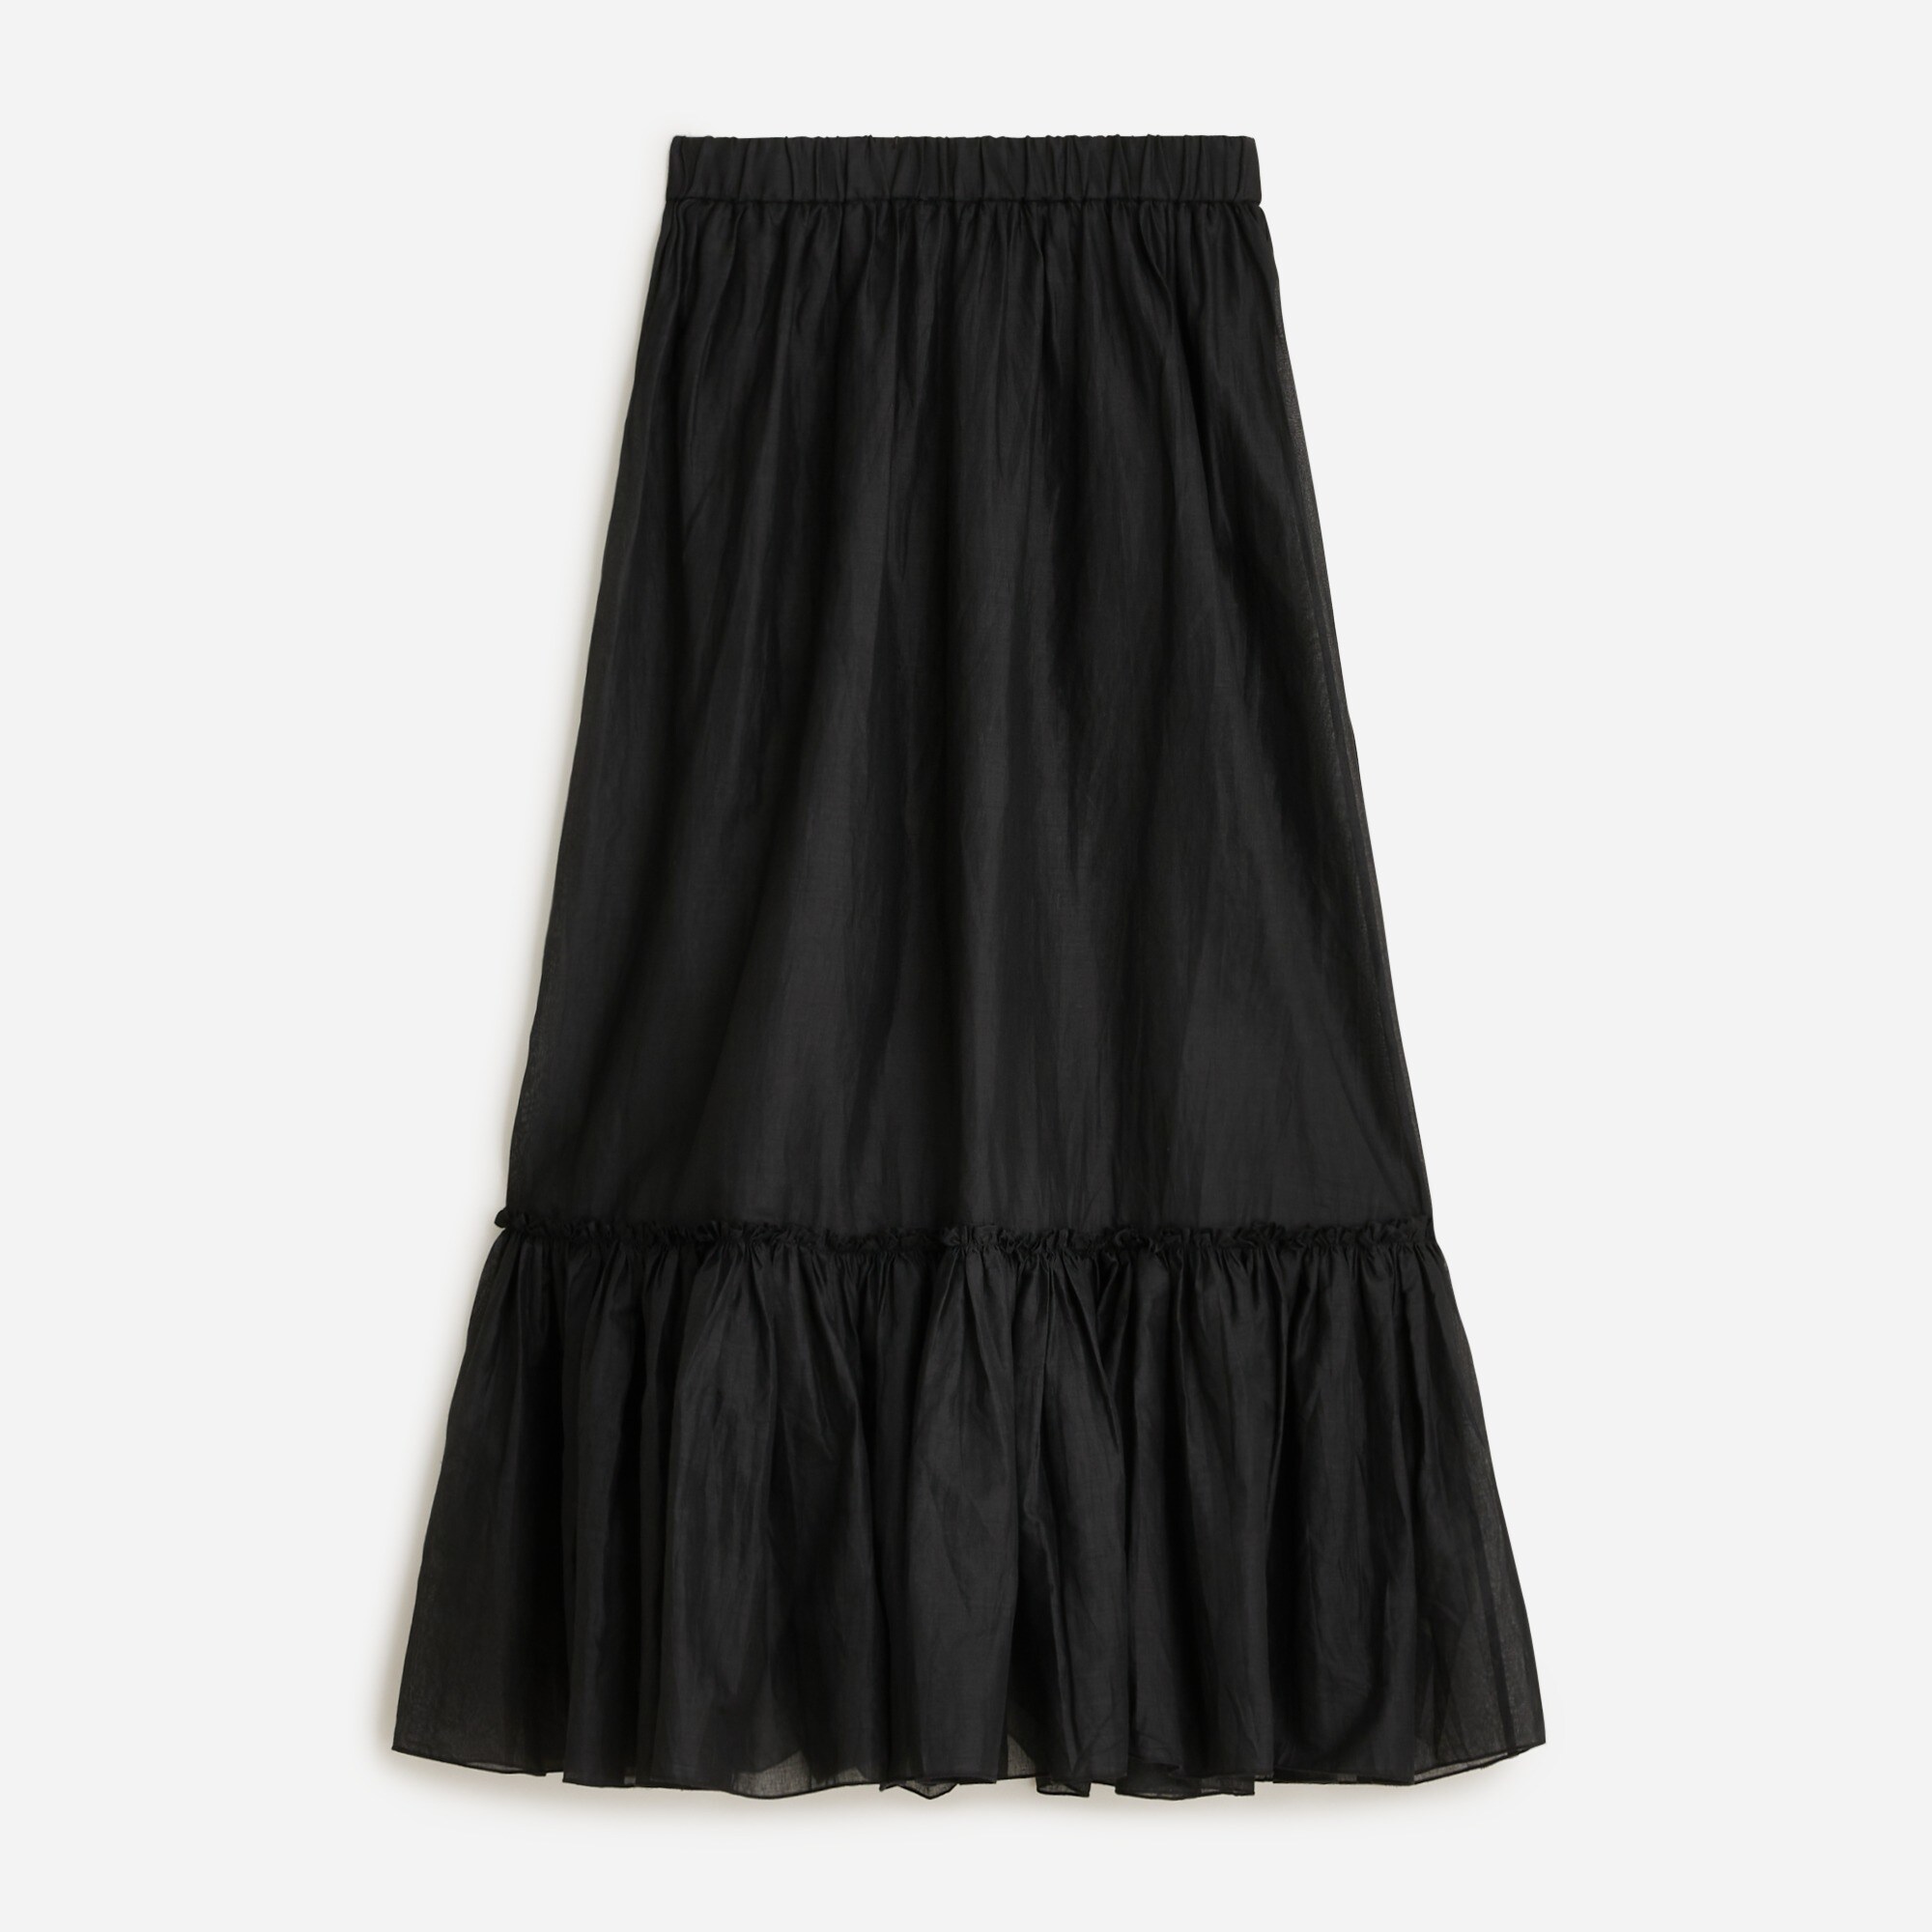  Amelia maxi skirt in crinkle cotton